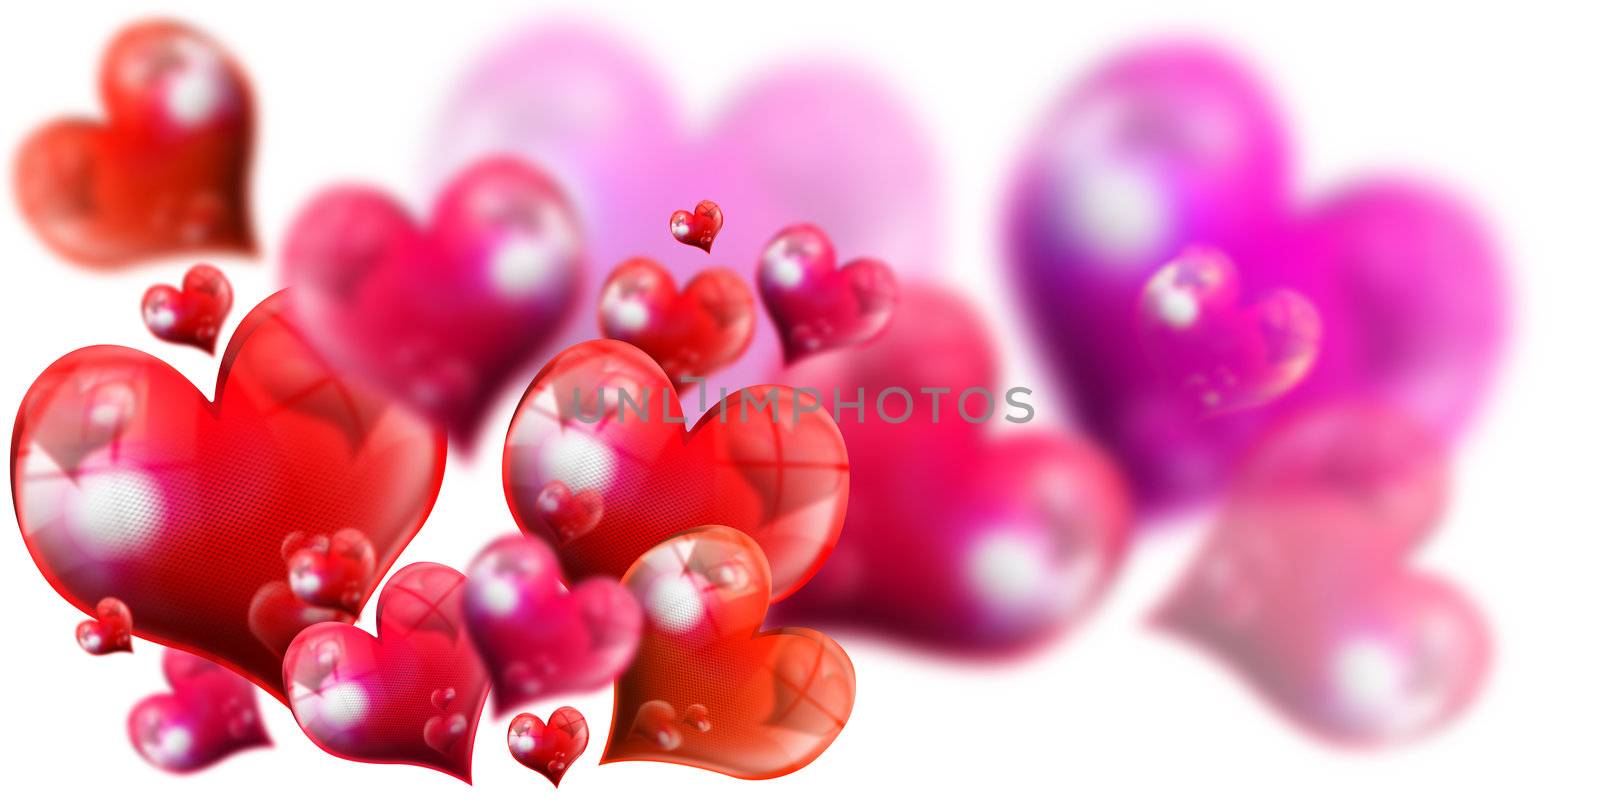 Romantic background with red and fuchsia hearts on white background